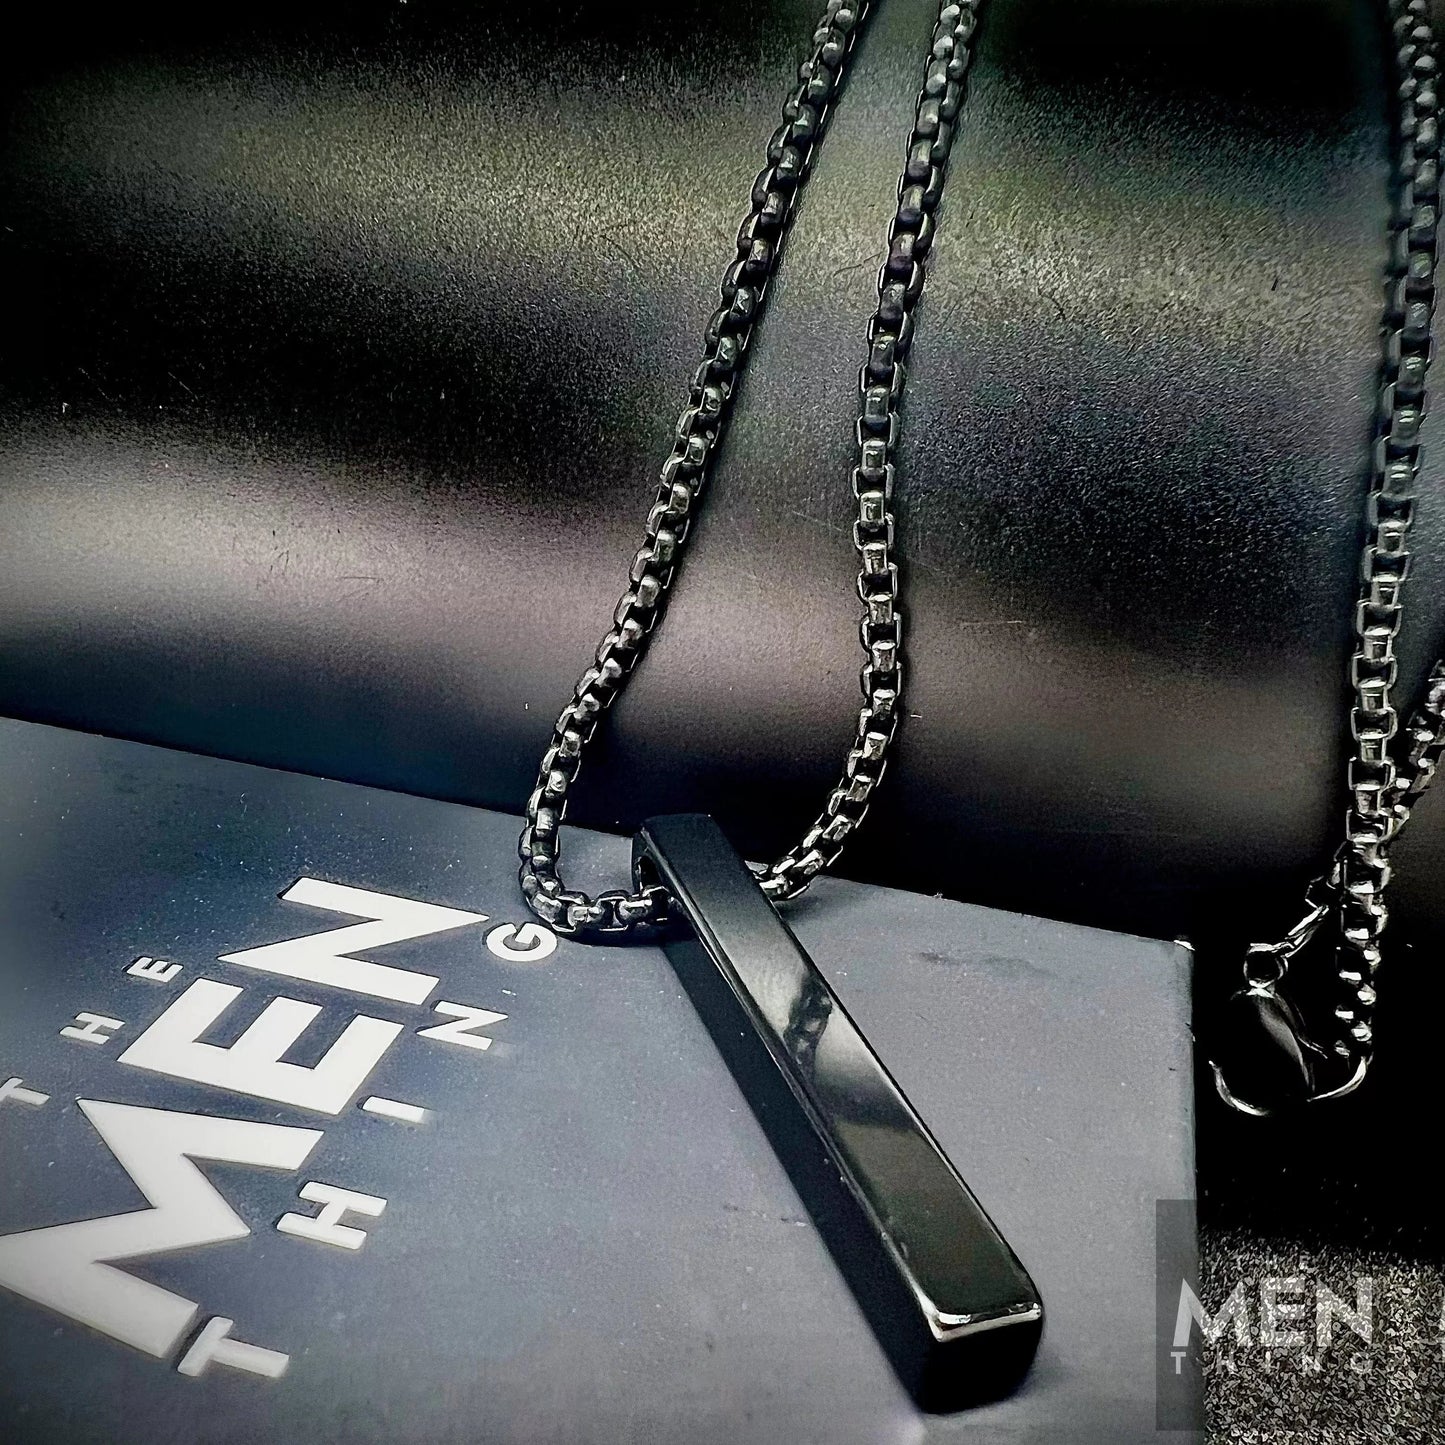 THE MEN THING Alloy Black Plating Pendant with Pure Stainless Steel 24inch Chain for Men, European trending Style - Round Box Chain & Pendant for Men & Boy